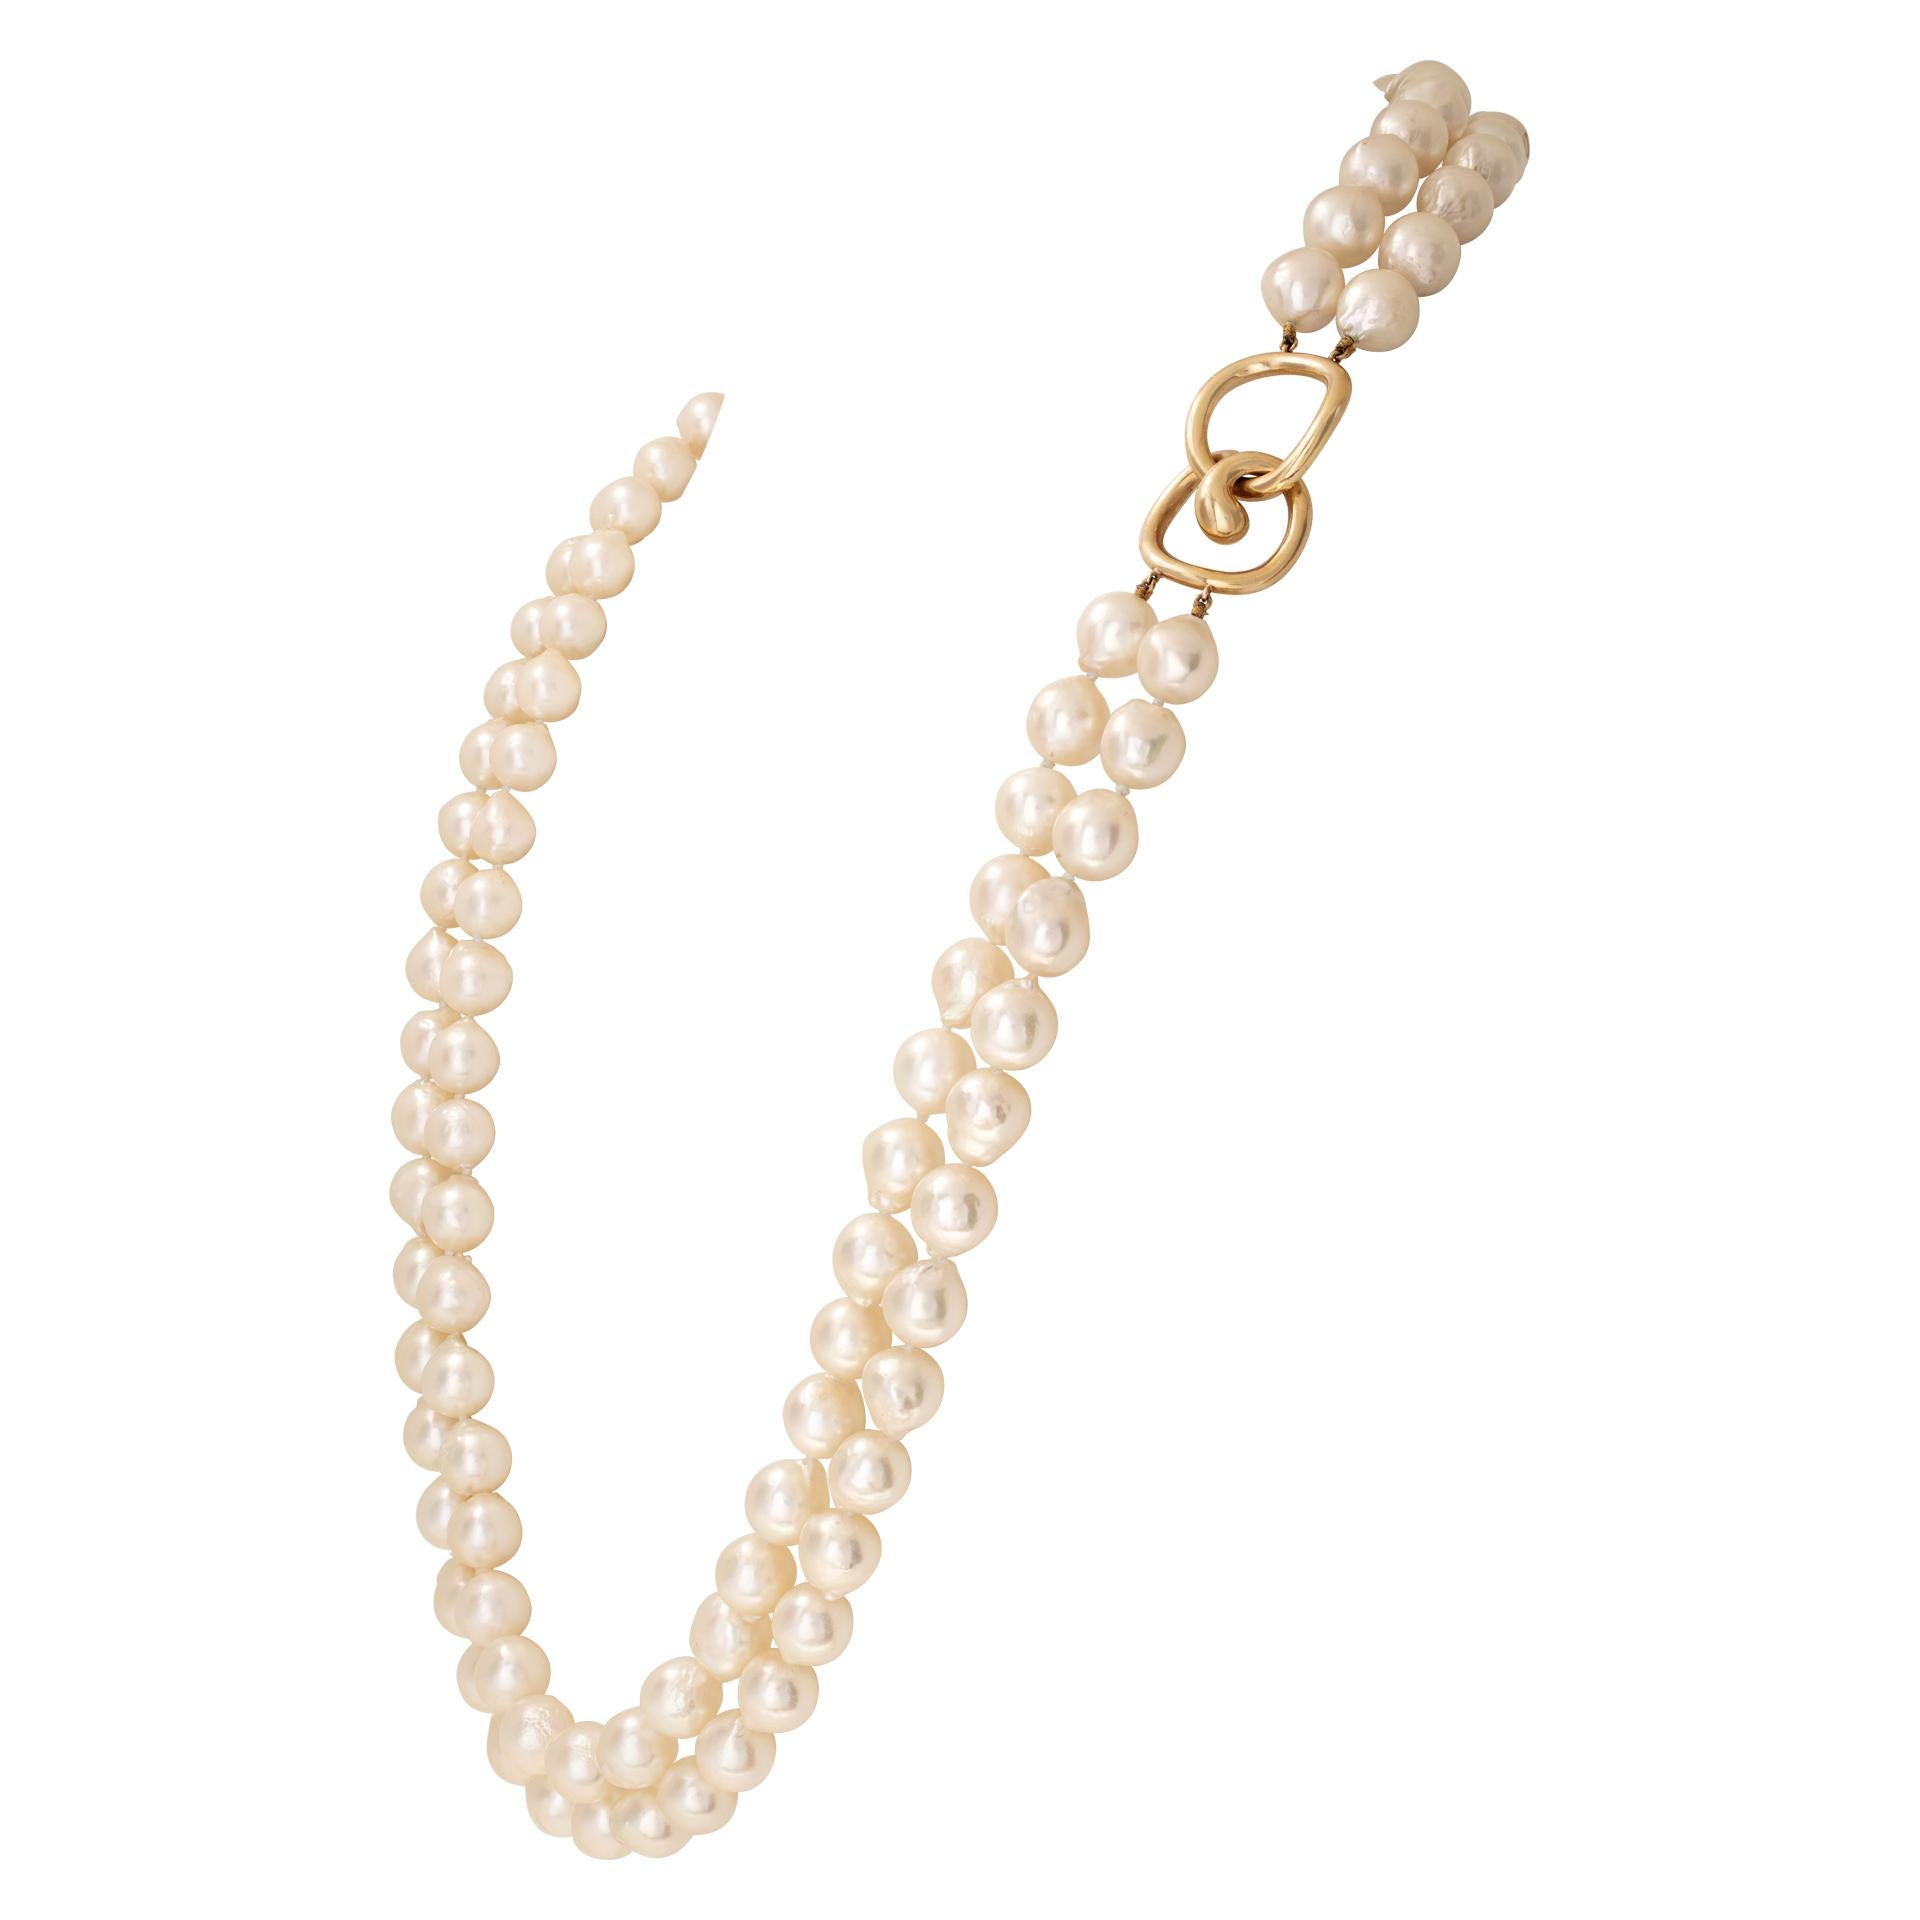 Angela Cummings Tiffany & Co. Opera length (34 inches) double stranded snowflakes Baroque Akoya pearls (8.5 x 9mm) gold to silver overtones necklace with 18K yellow gold clasp. Hallmarks on 18K yellow gold clasp 